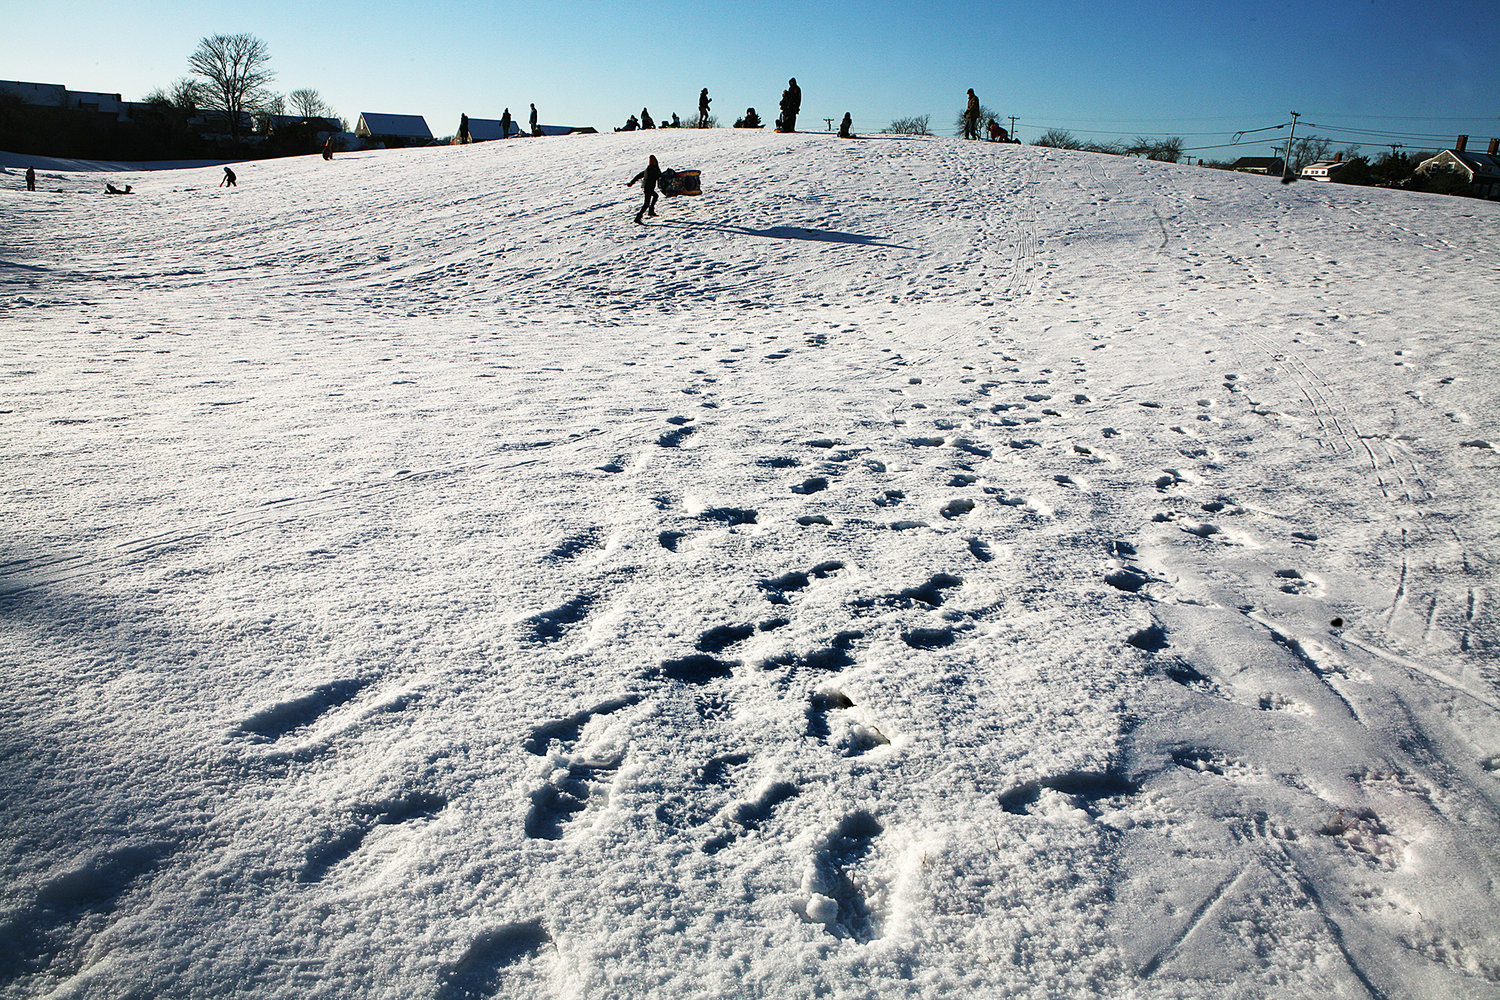 MONDAY, FEBRUARY 8, 2021 -- Footprints in the snow and sledding off Quaker Road on Monday following Sunday's snow storm. Photo by Ray K. Saunders